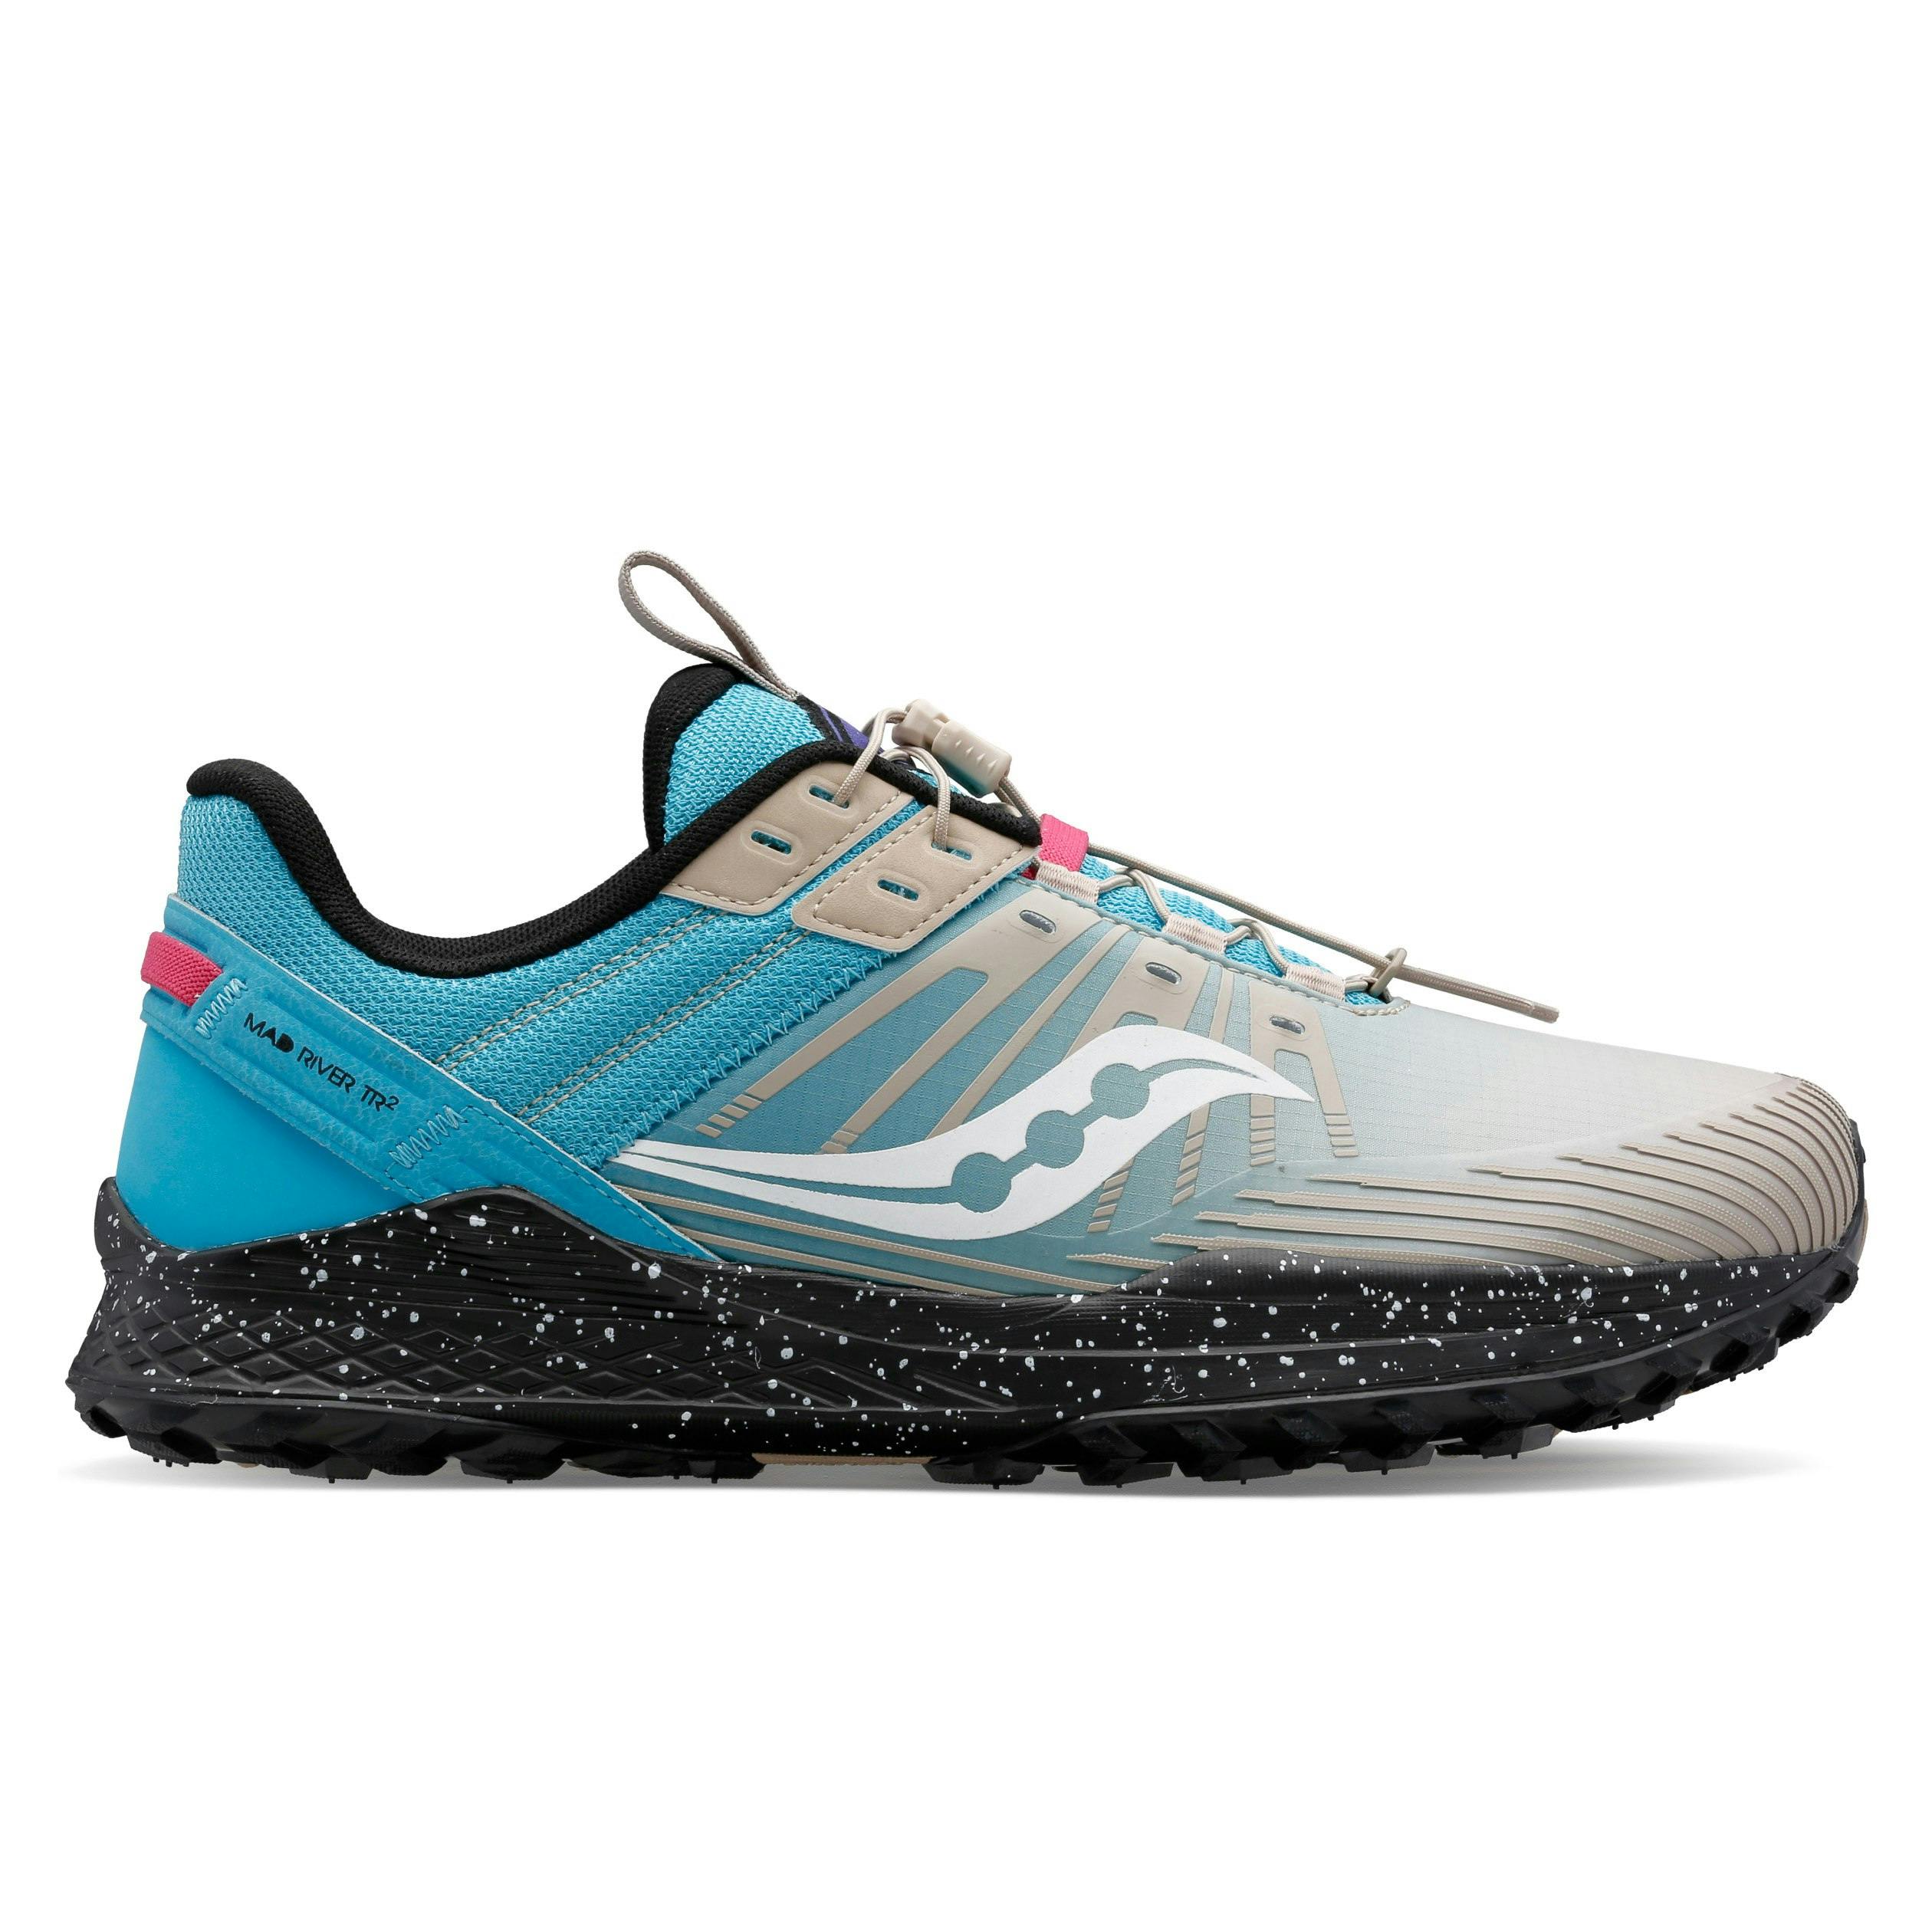 Saucony Mad River TR2 "Water"